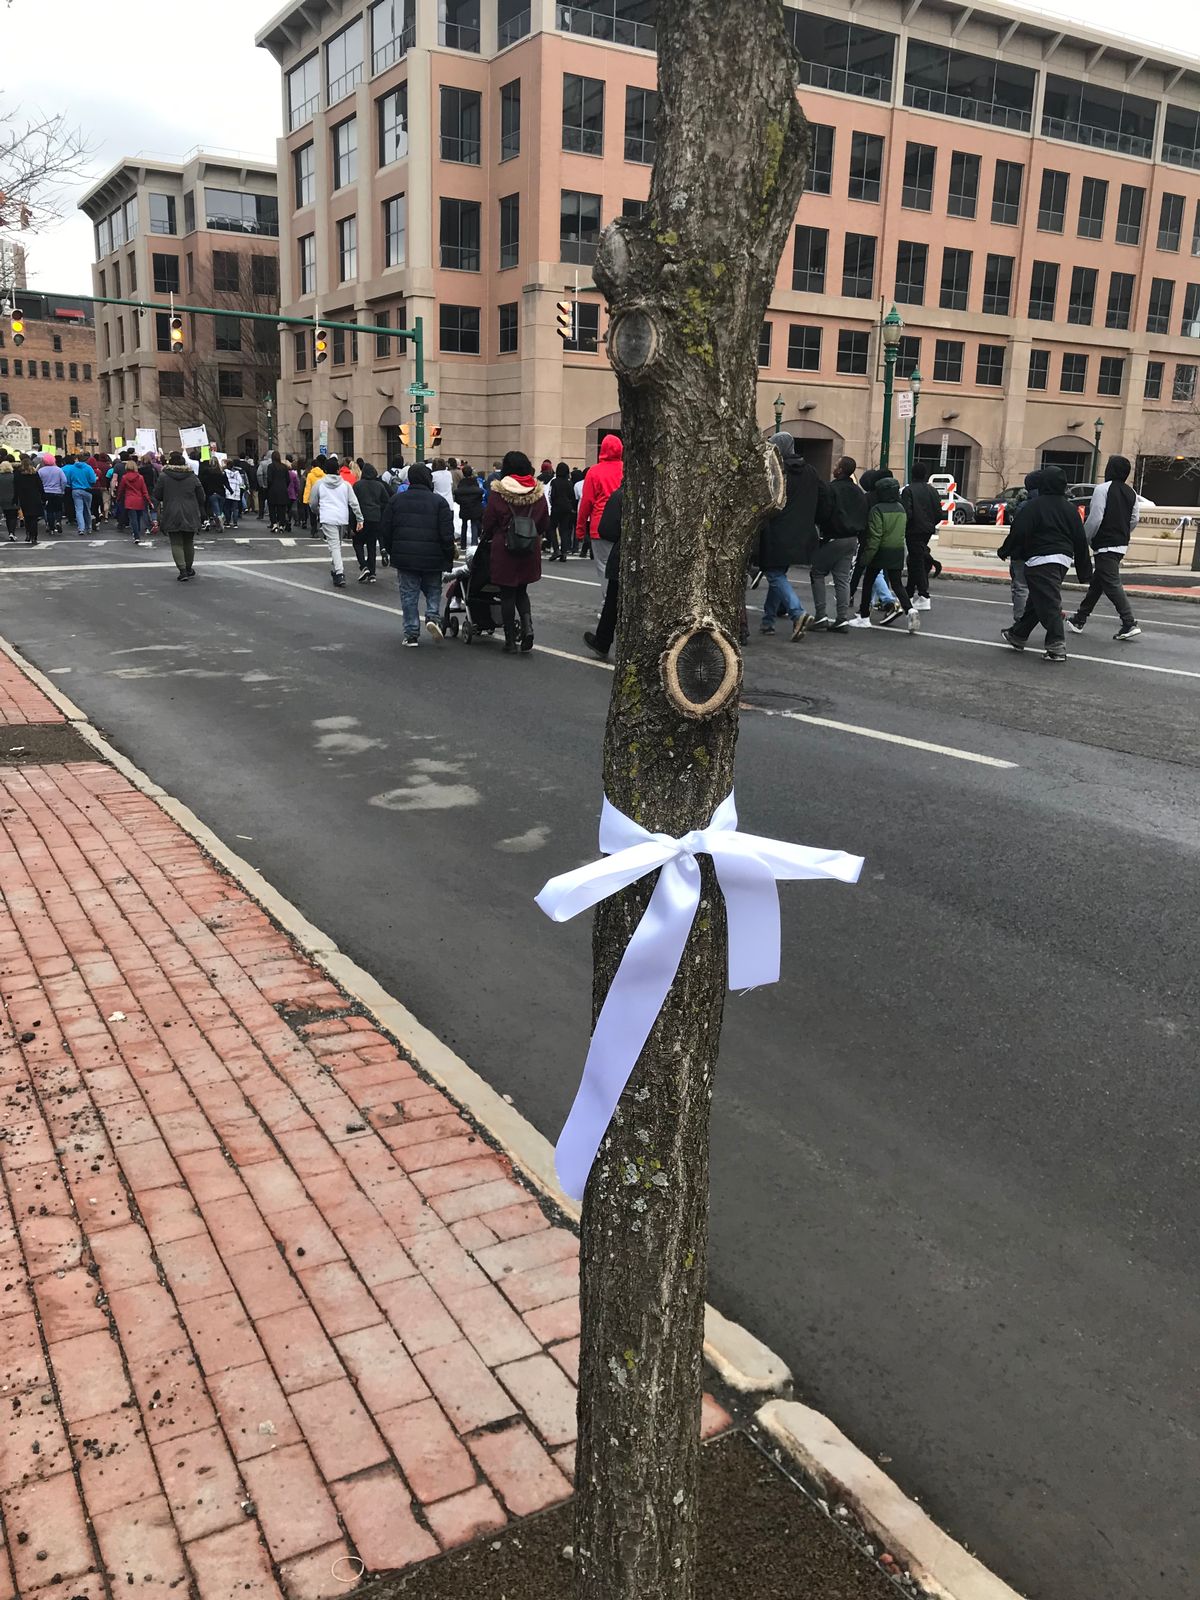 Tying white ribbons along the walk route - 